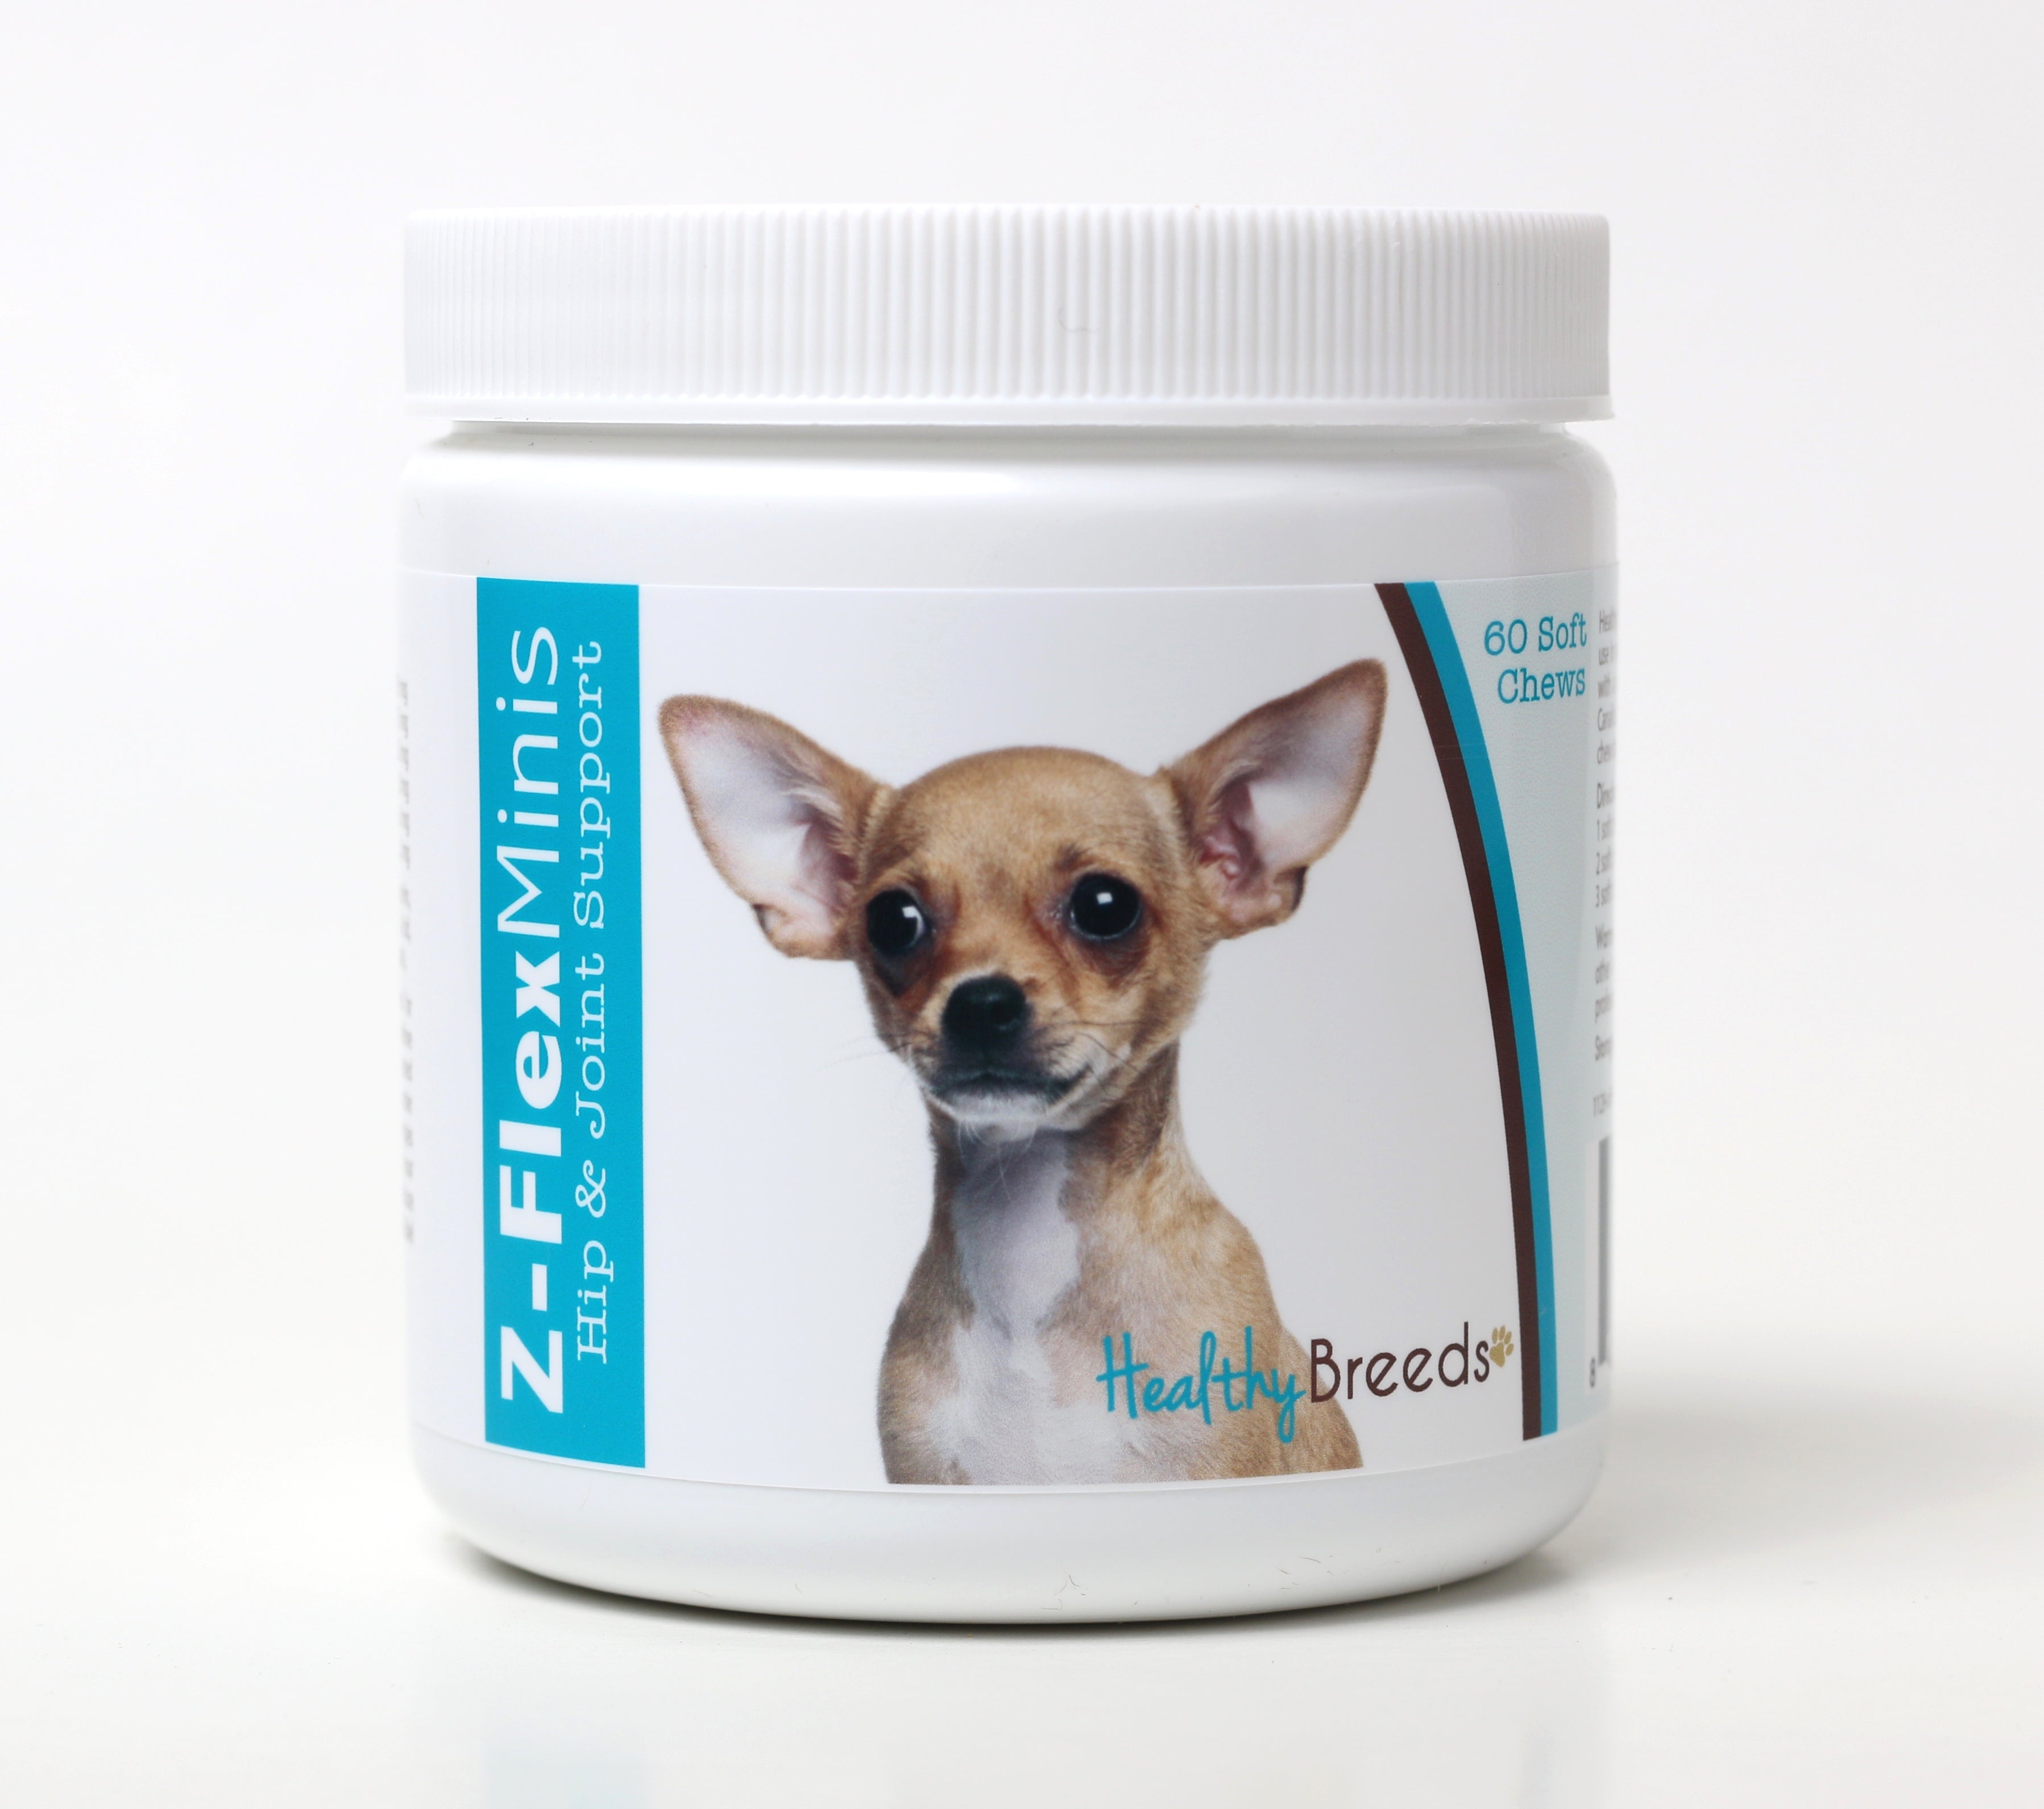 Chihuahua Z-Flex Minis Hip and Joint Support Soft Chews 60 Count